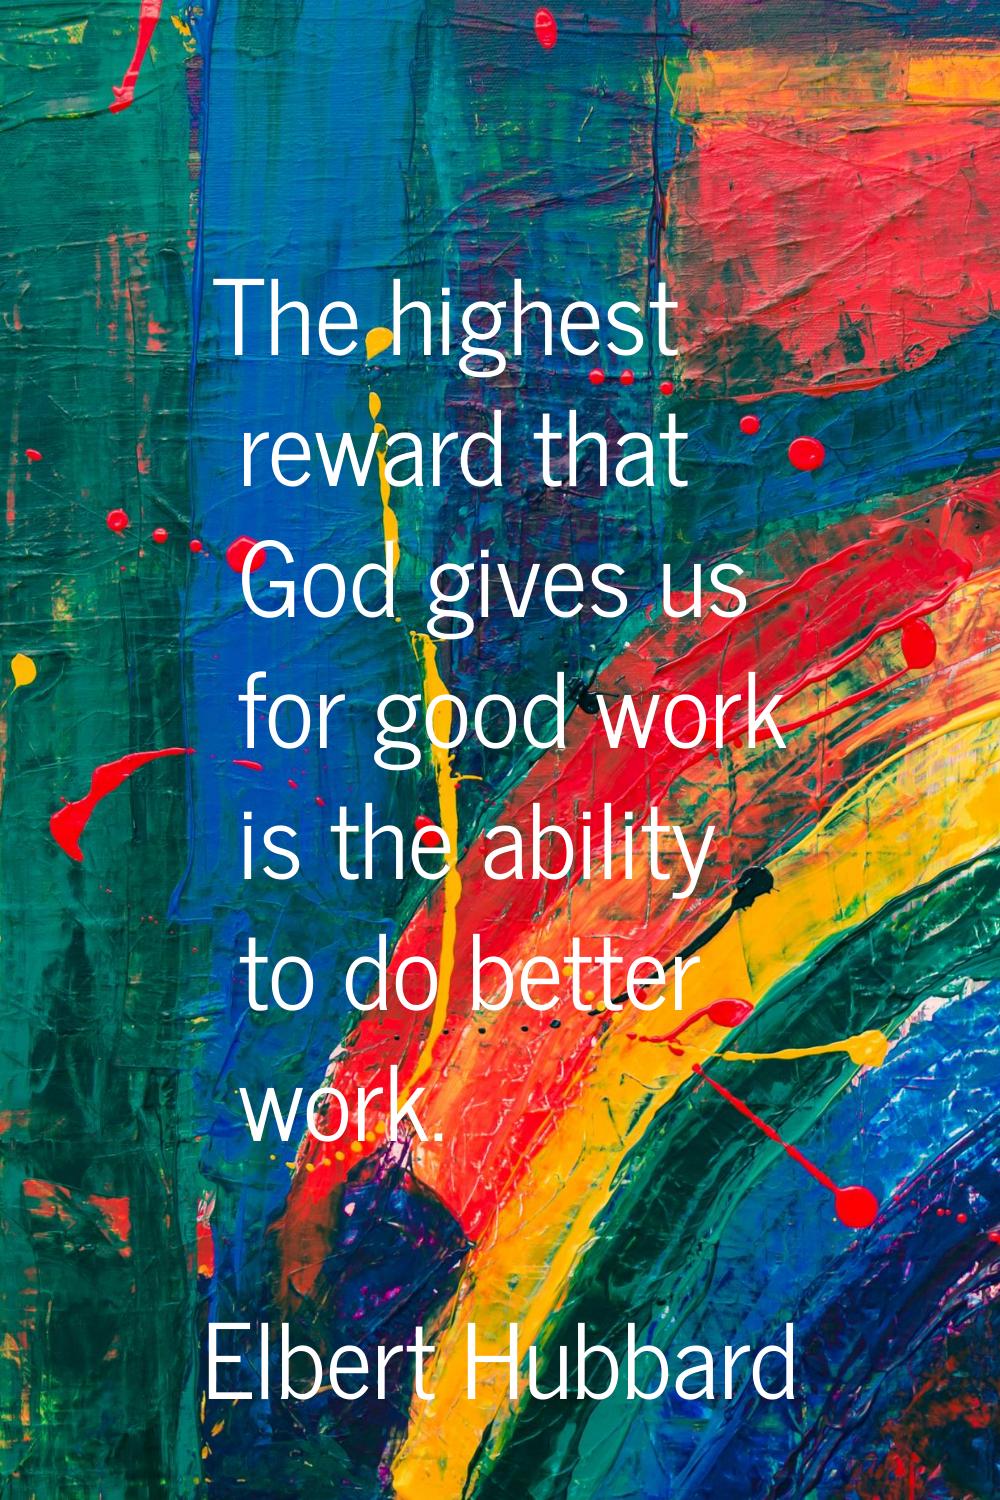 The highest reward that God gives us for good work is the ability to do better work.